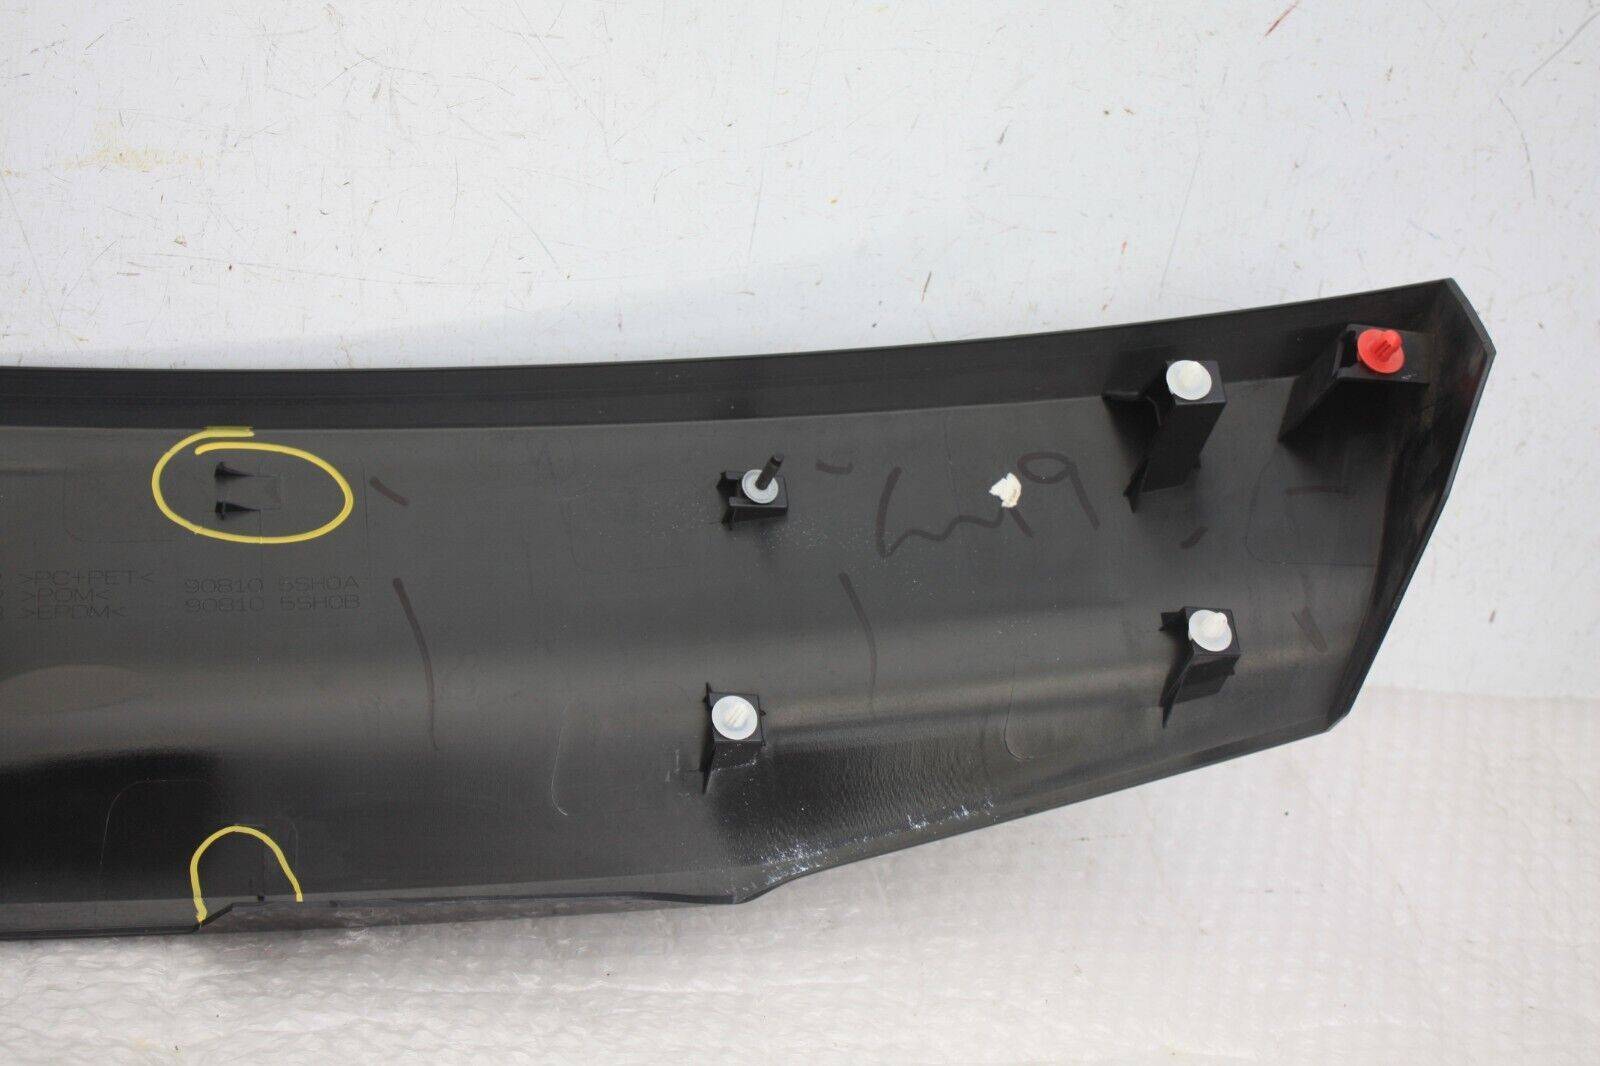 Nissan-Leaf-Rear-Tailgate-Trunk-Lid-Panel-Cover-Trim-90810-5SH0A-FIXING-DAMAGED-176365212247-14